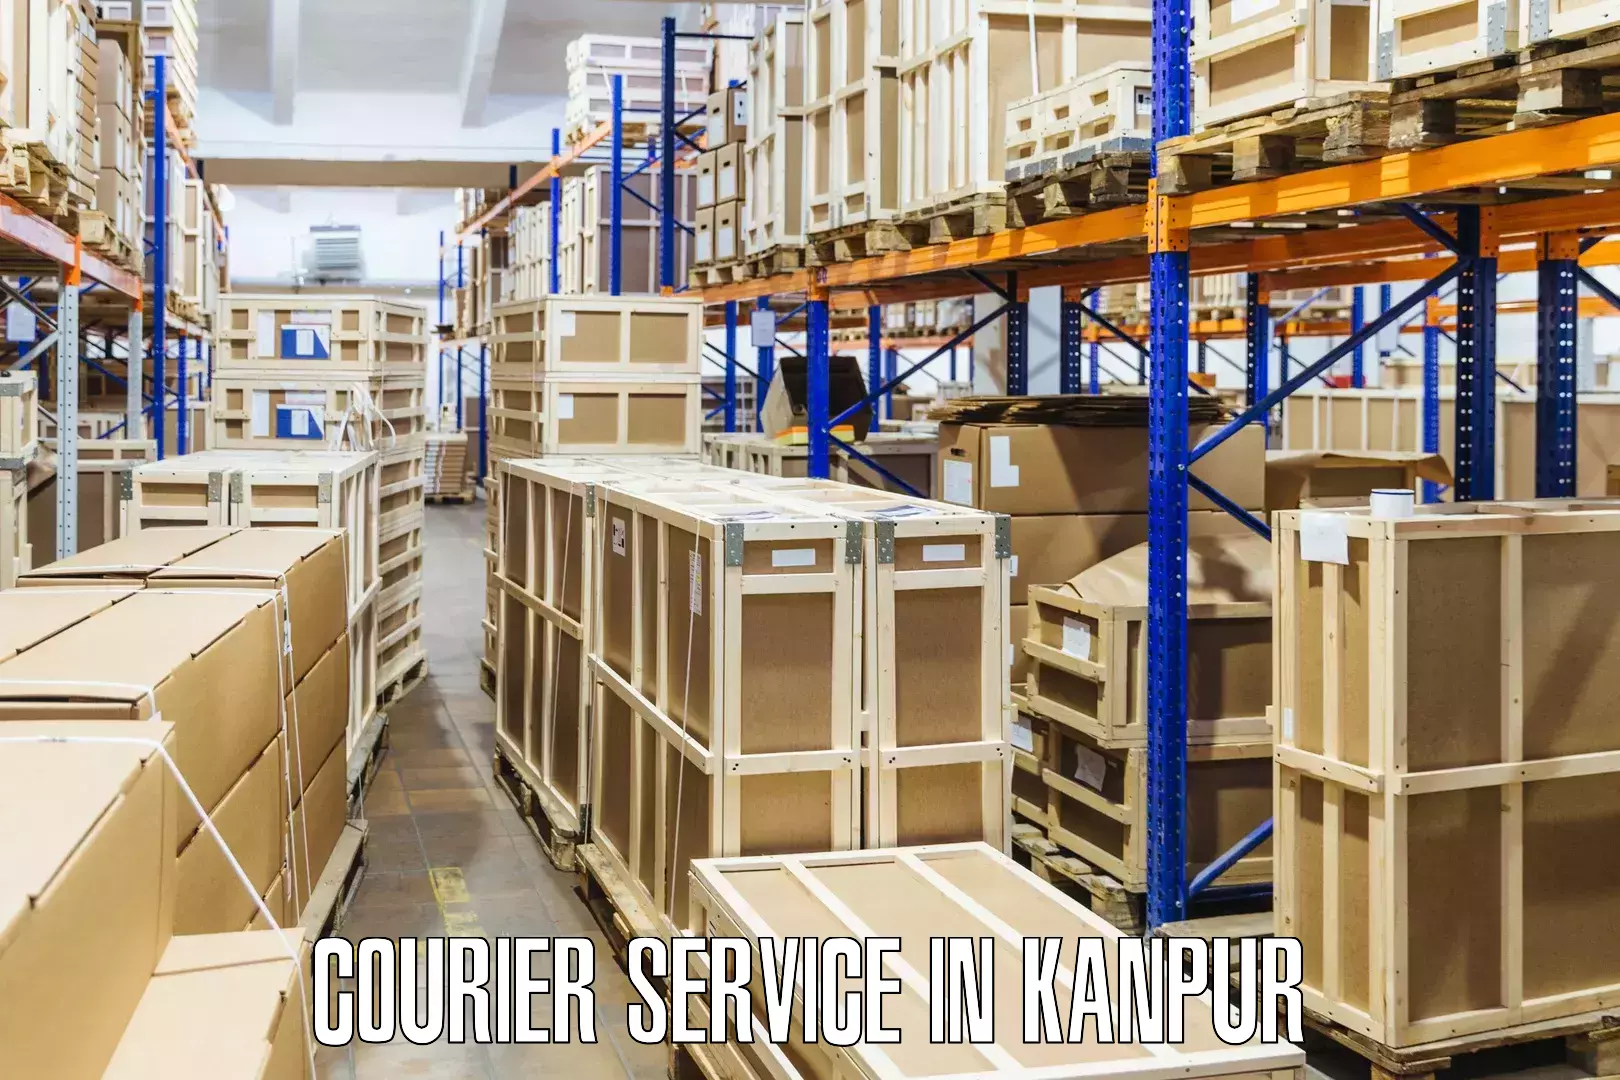 Business delivery service in Kanpur